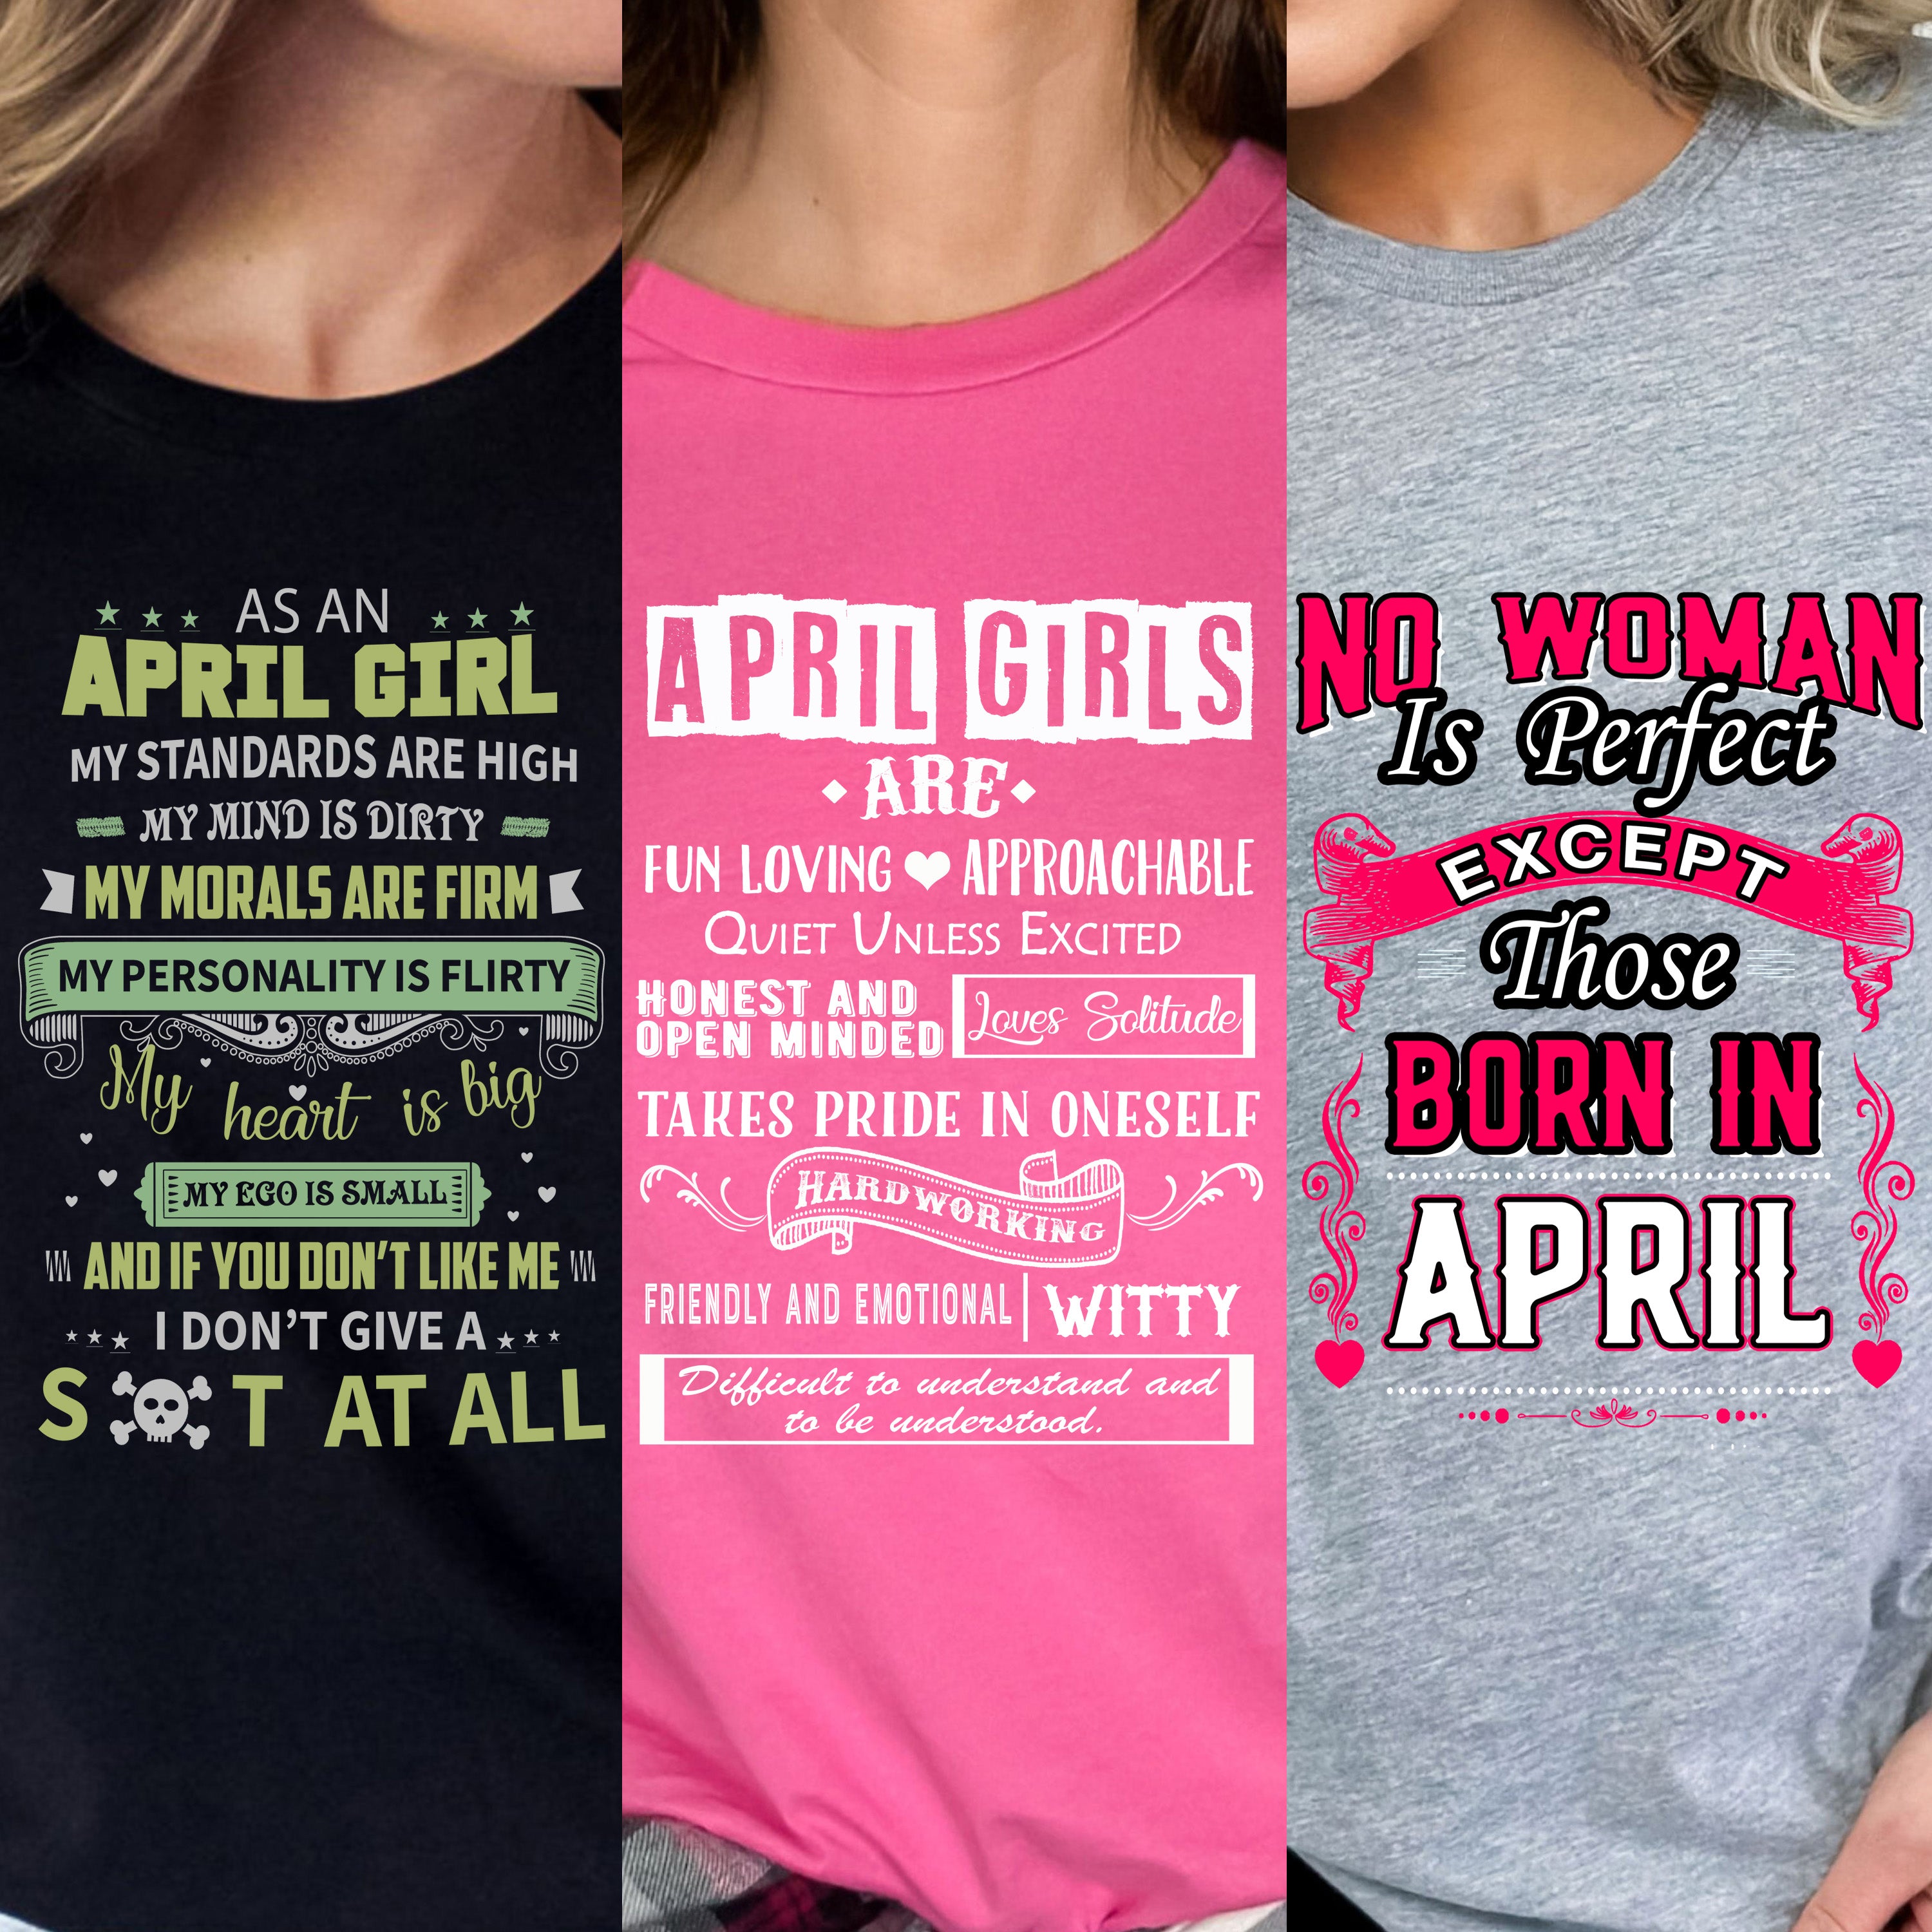 "April Pack Of 3 Shirts Combo -2"